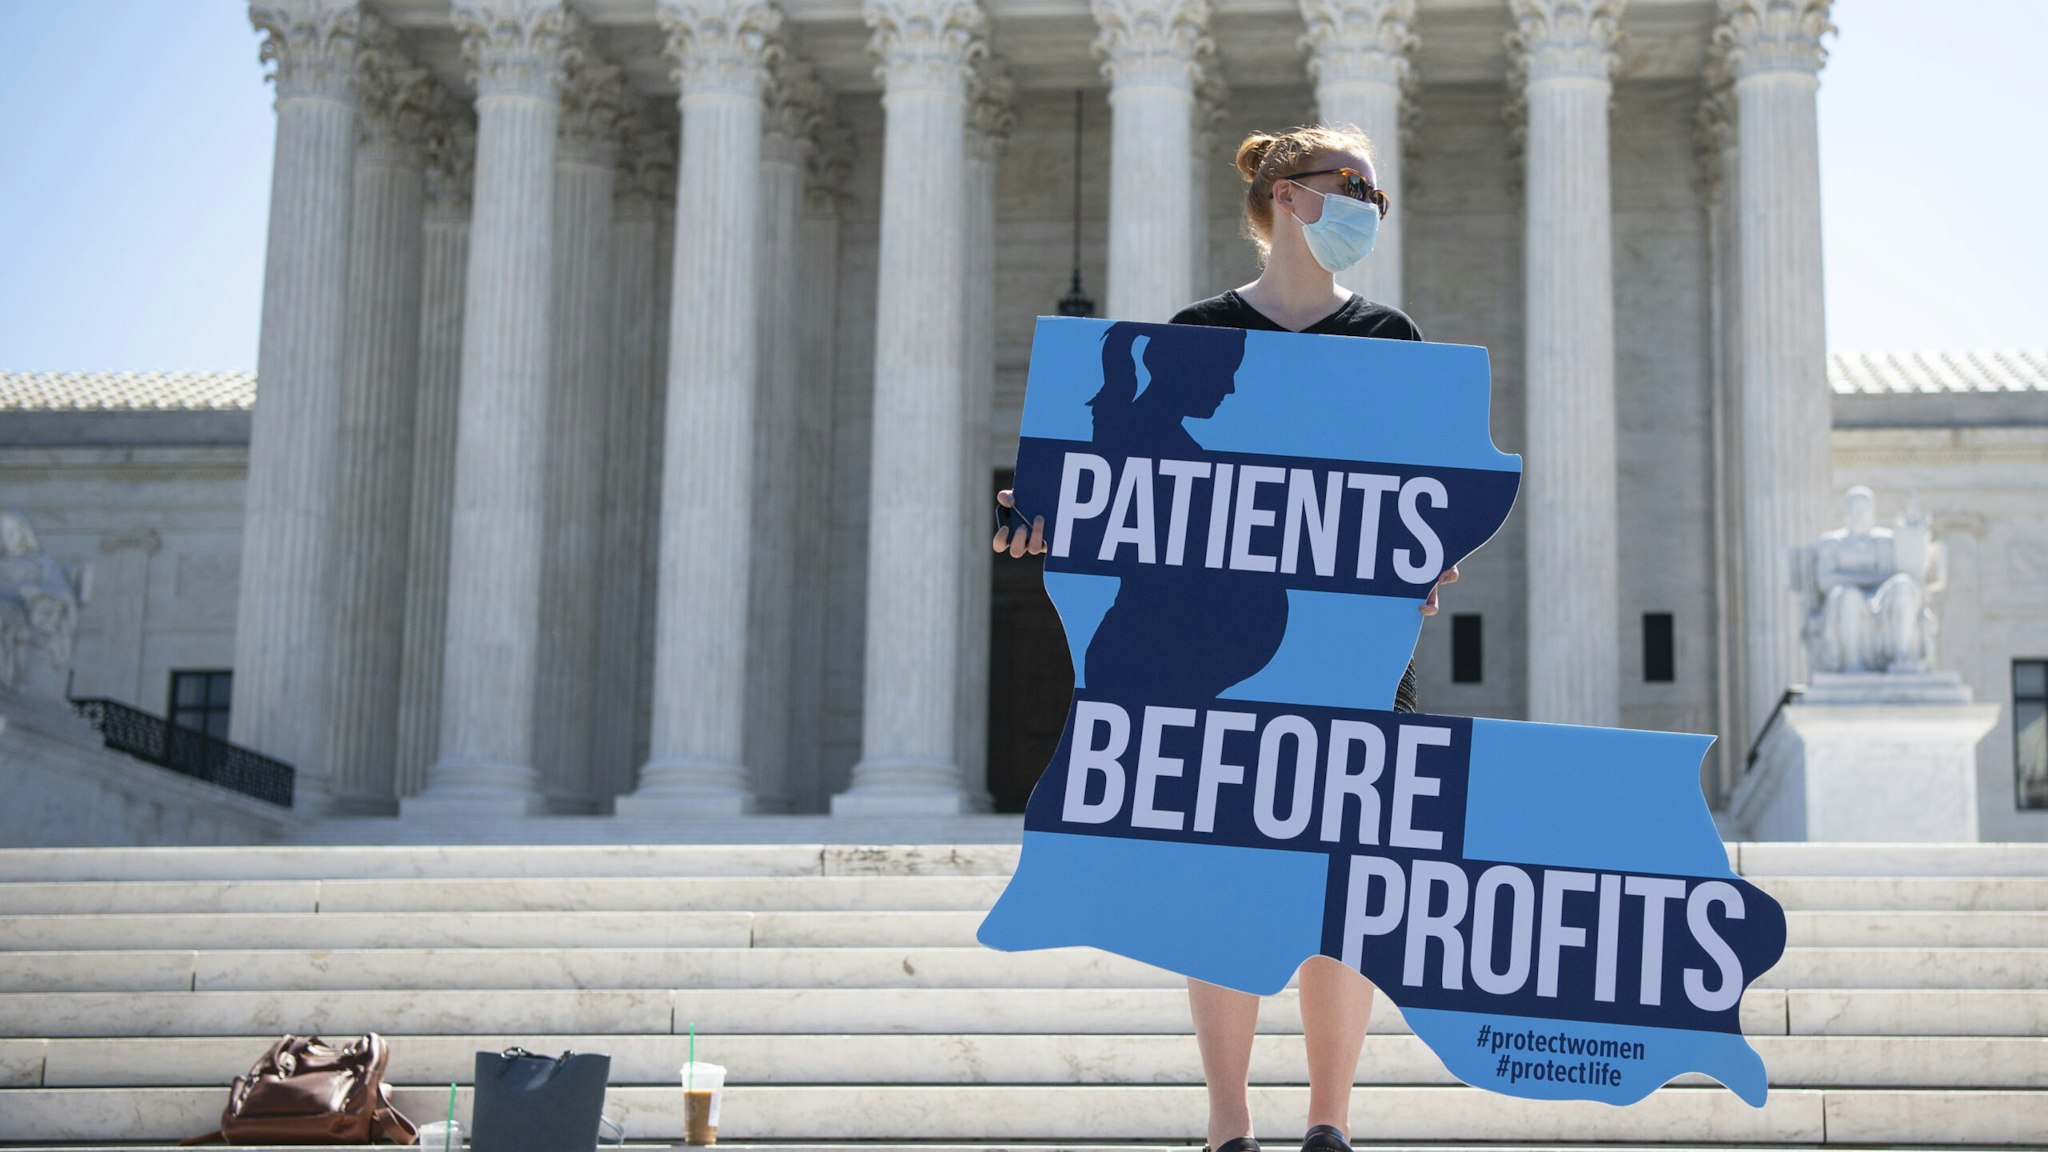 UNITED STATES - JUNE 29: An anti-abortion demonstrator holds a sign as she and others protest in front of the Supreme Court after a decision was made to strike down a Louisiana law regulating abortion clinics in Washington on Monday, June 29, 2020. (Photo by Caroline Brehman/CQ-Roll Call, Inc via Getty Images)